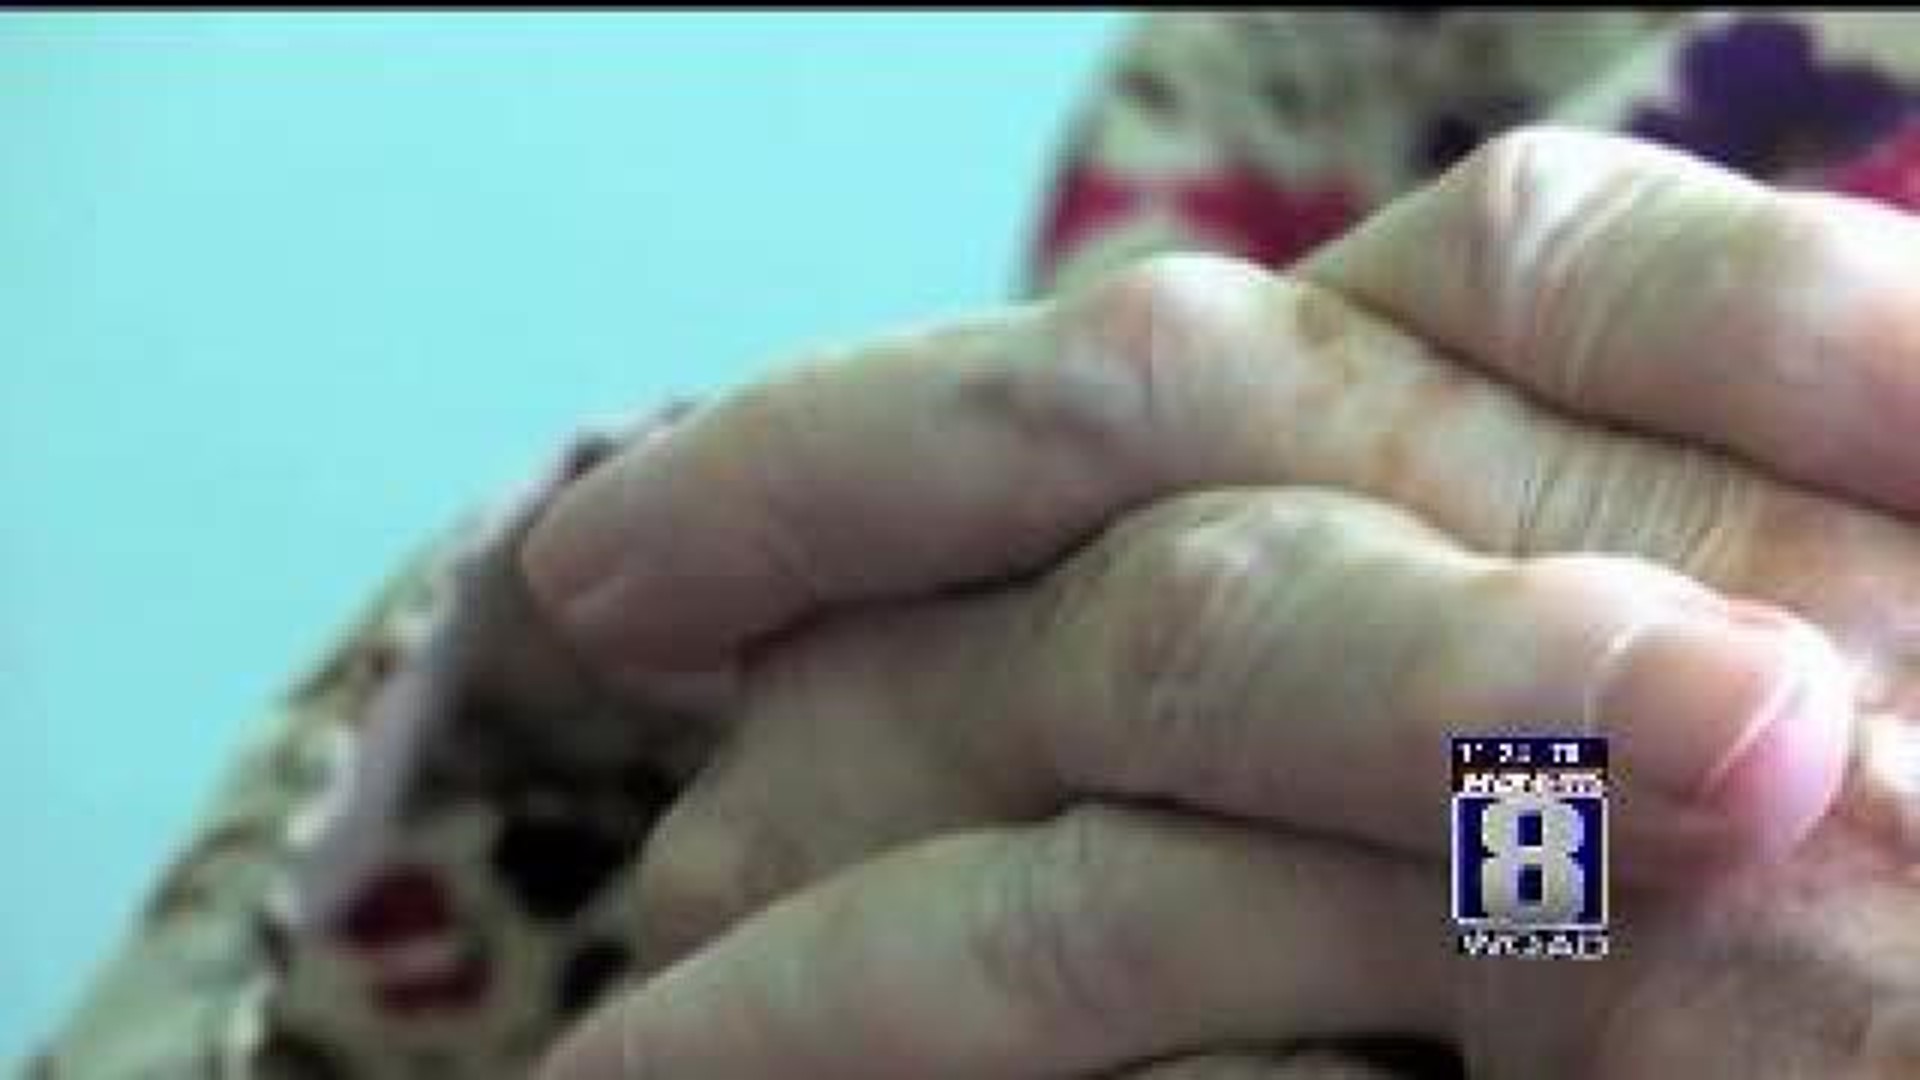 Elderly can be targets for fraud